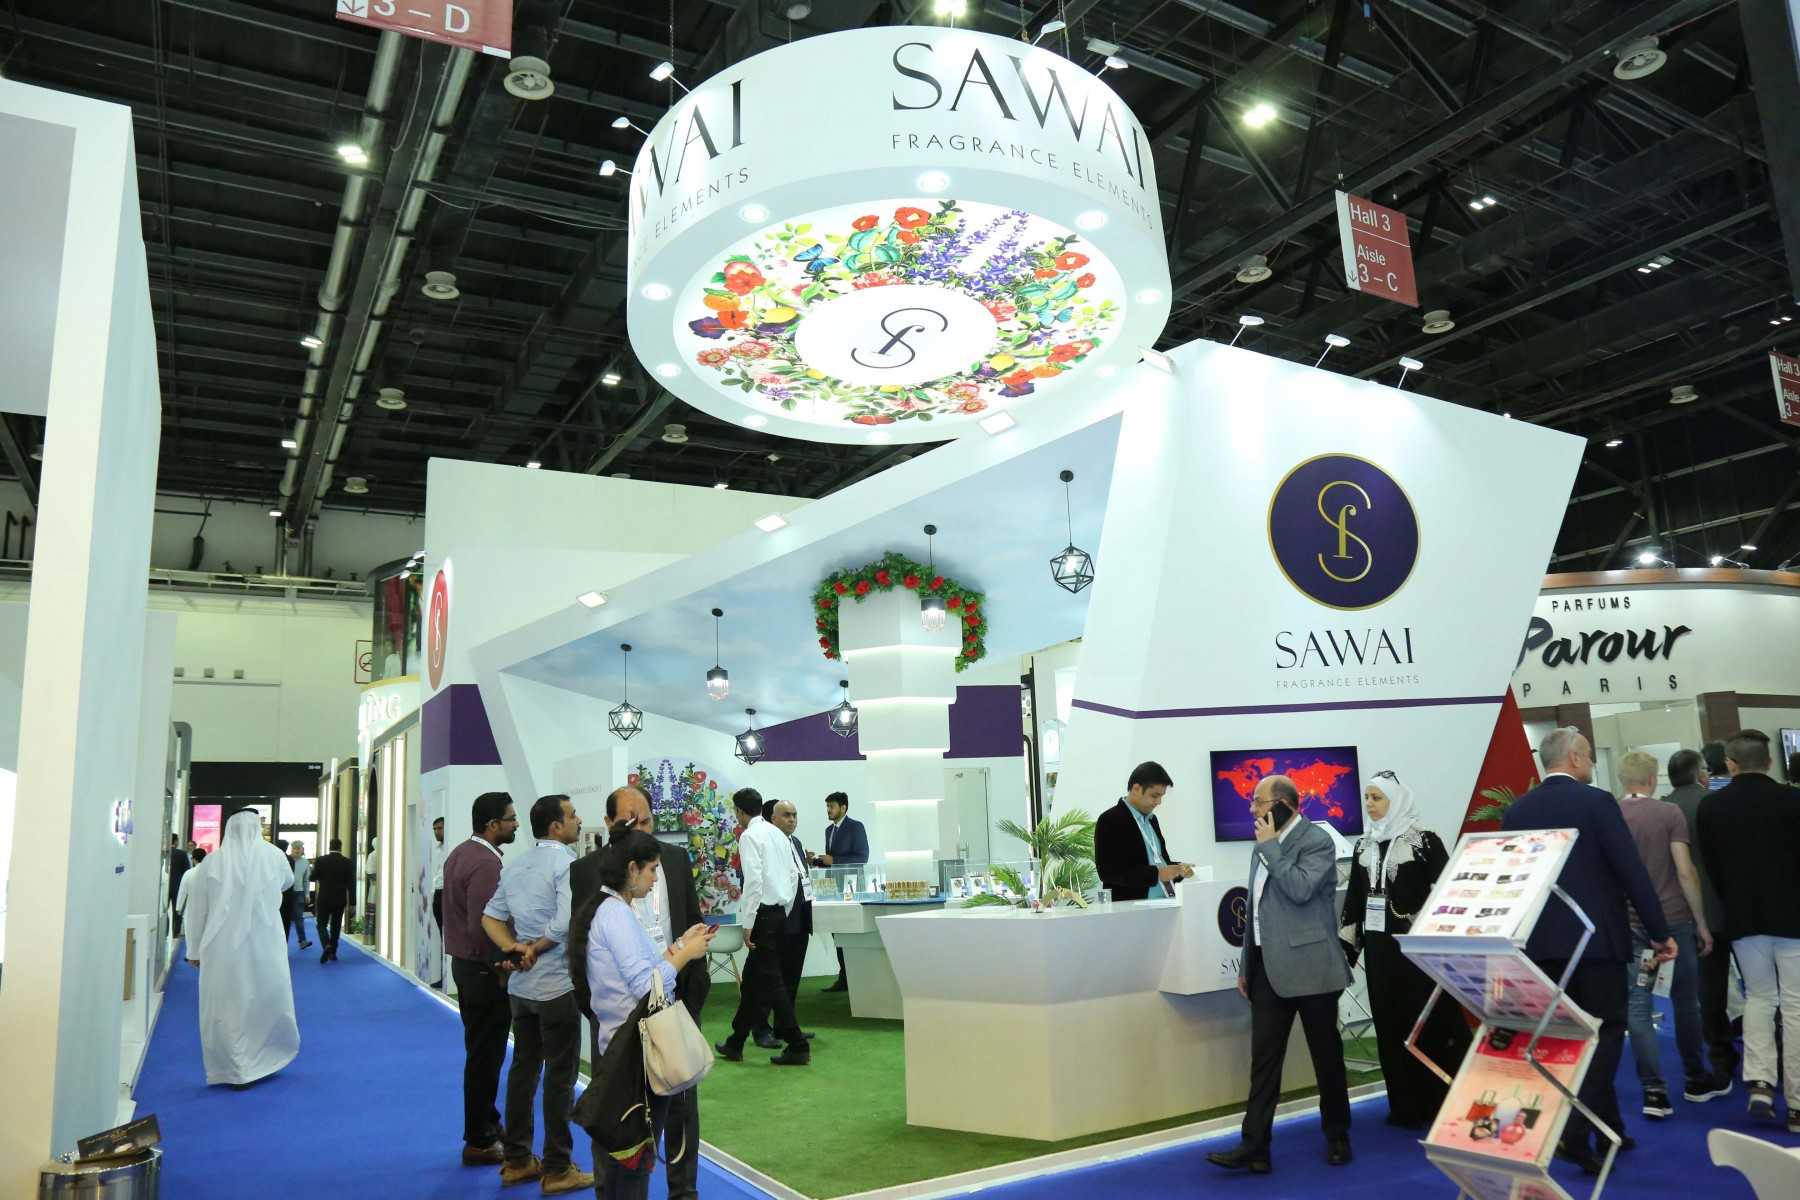 How to find the Best Exhibition Stand Contractor in Dubai?